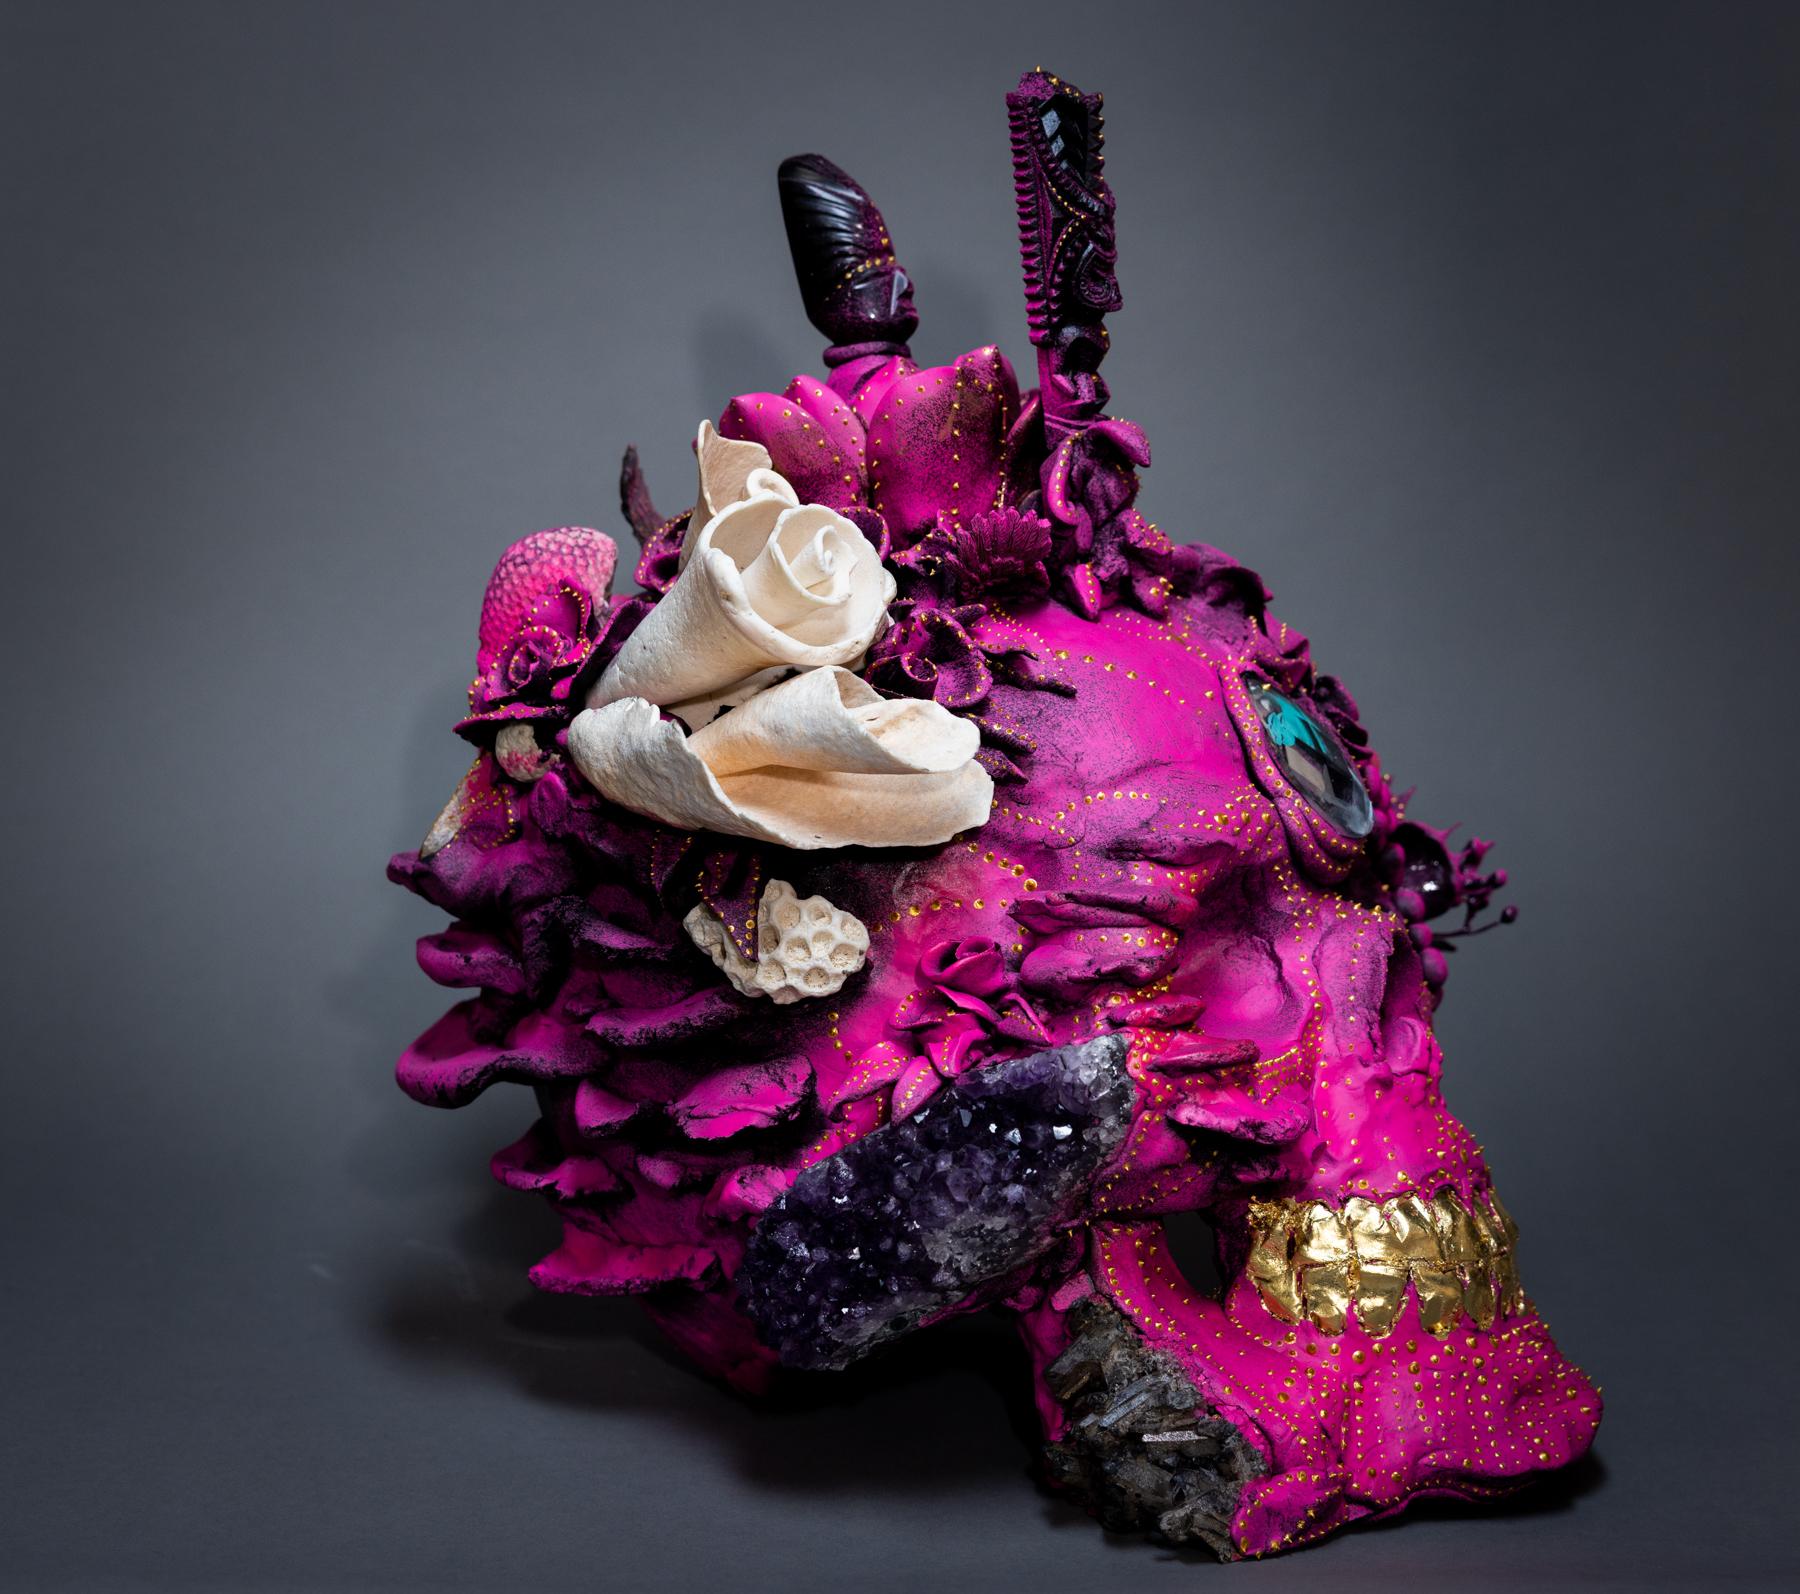 17”h 15”w 14”d 
Original Sculpture - Epoxy Clay, Gold Leaf, Amethyst Crystals and Crystals
Hand Signed by Johnathan Ball